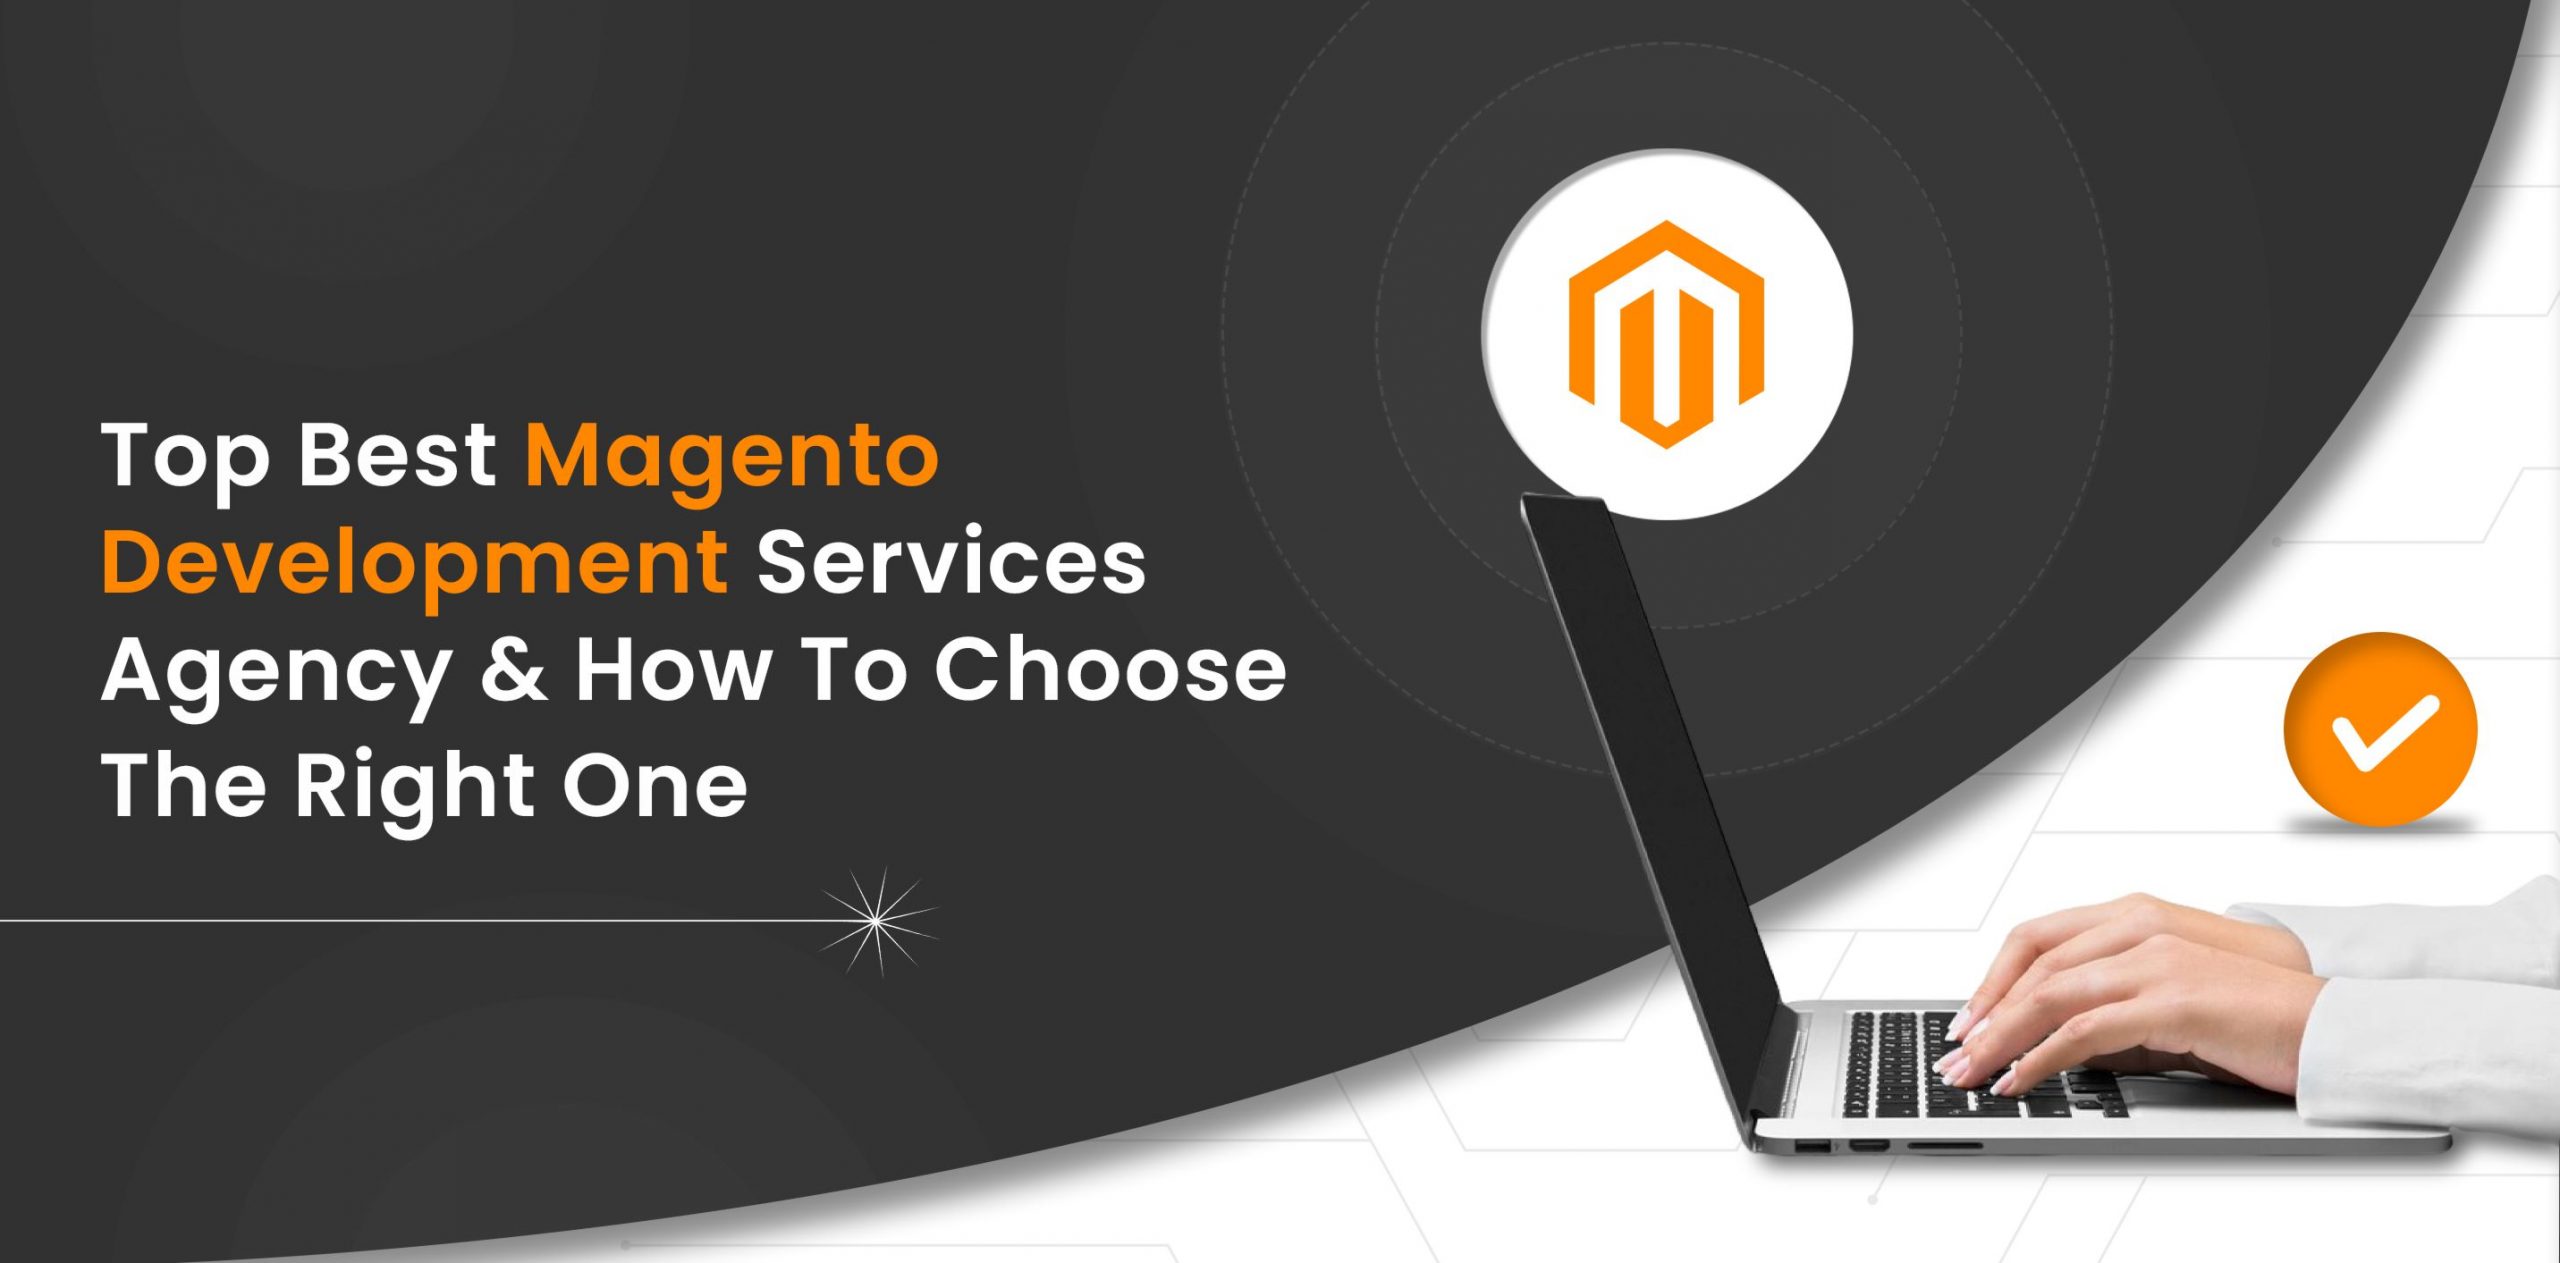 Top Best Magento Development Services Agency & How to Choose The Right One